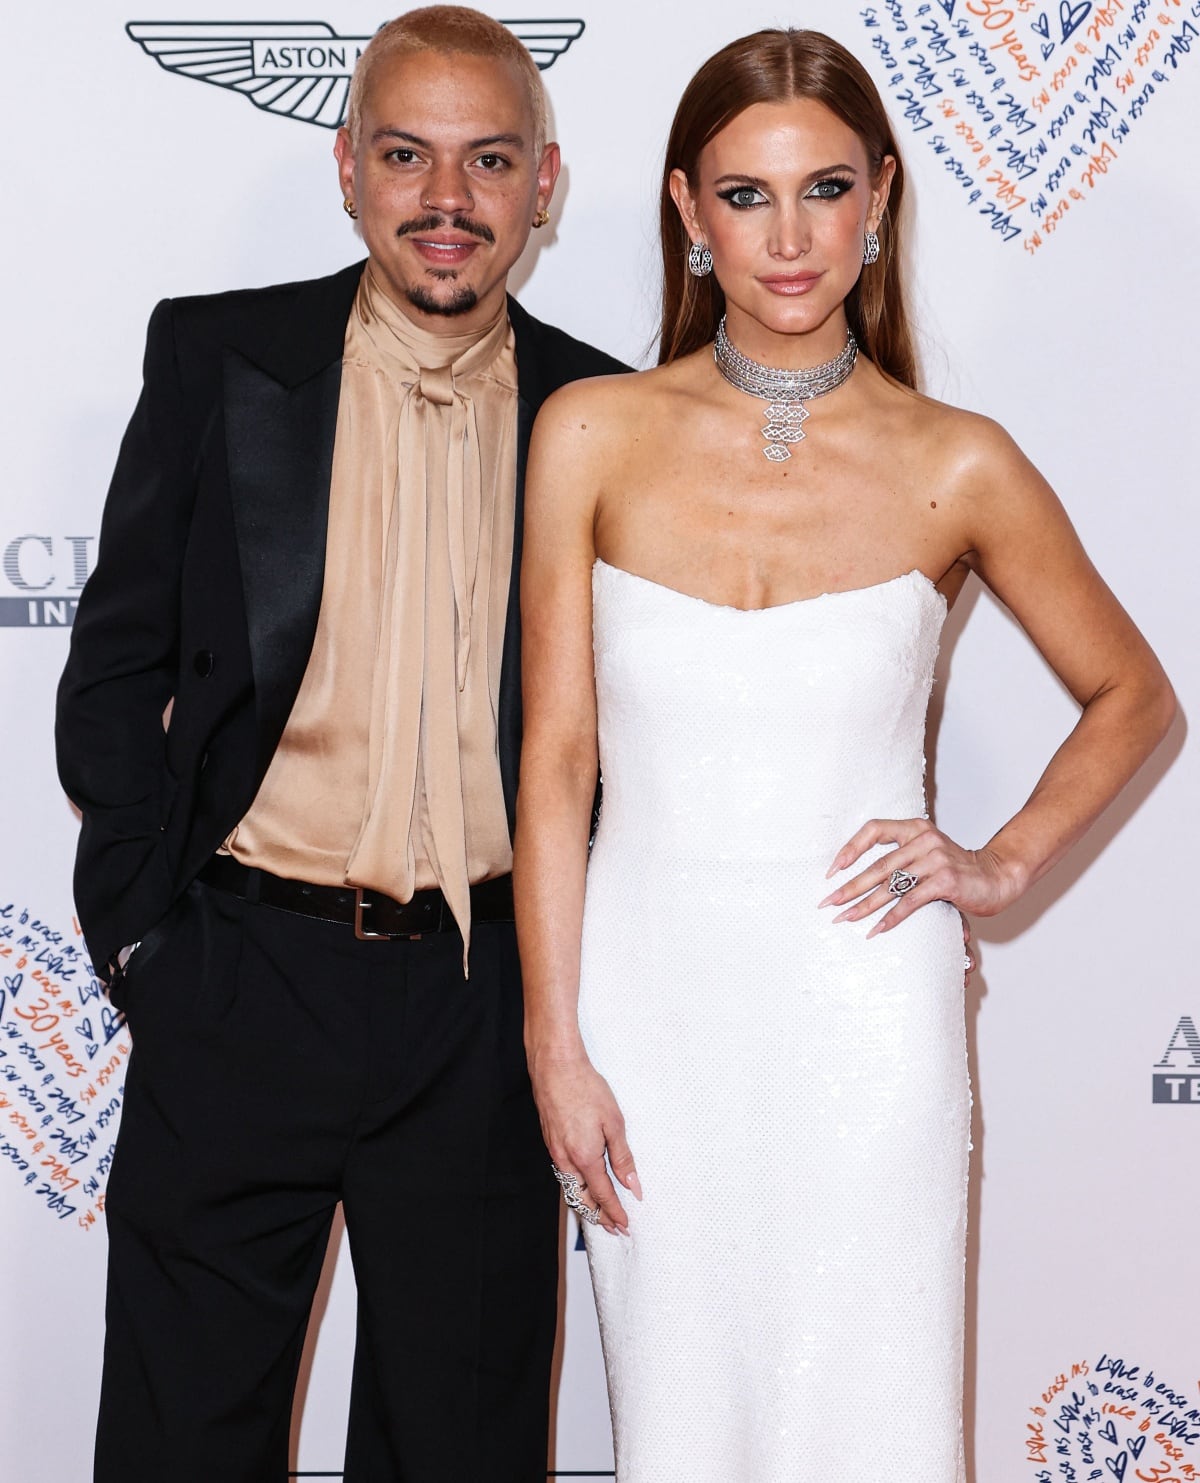 Evan Ross and Ashlee Simpson attending the 30th Annual Race to Erase MS Gala